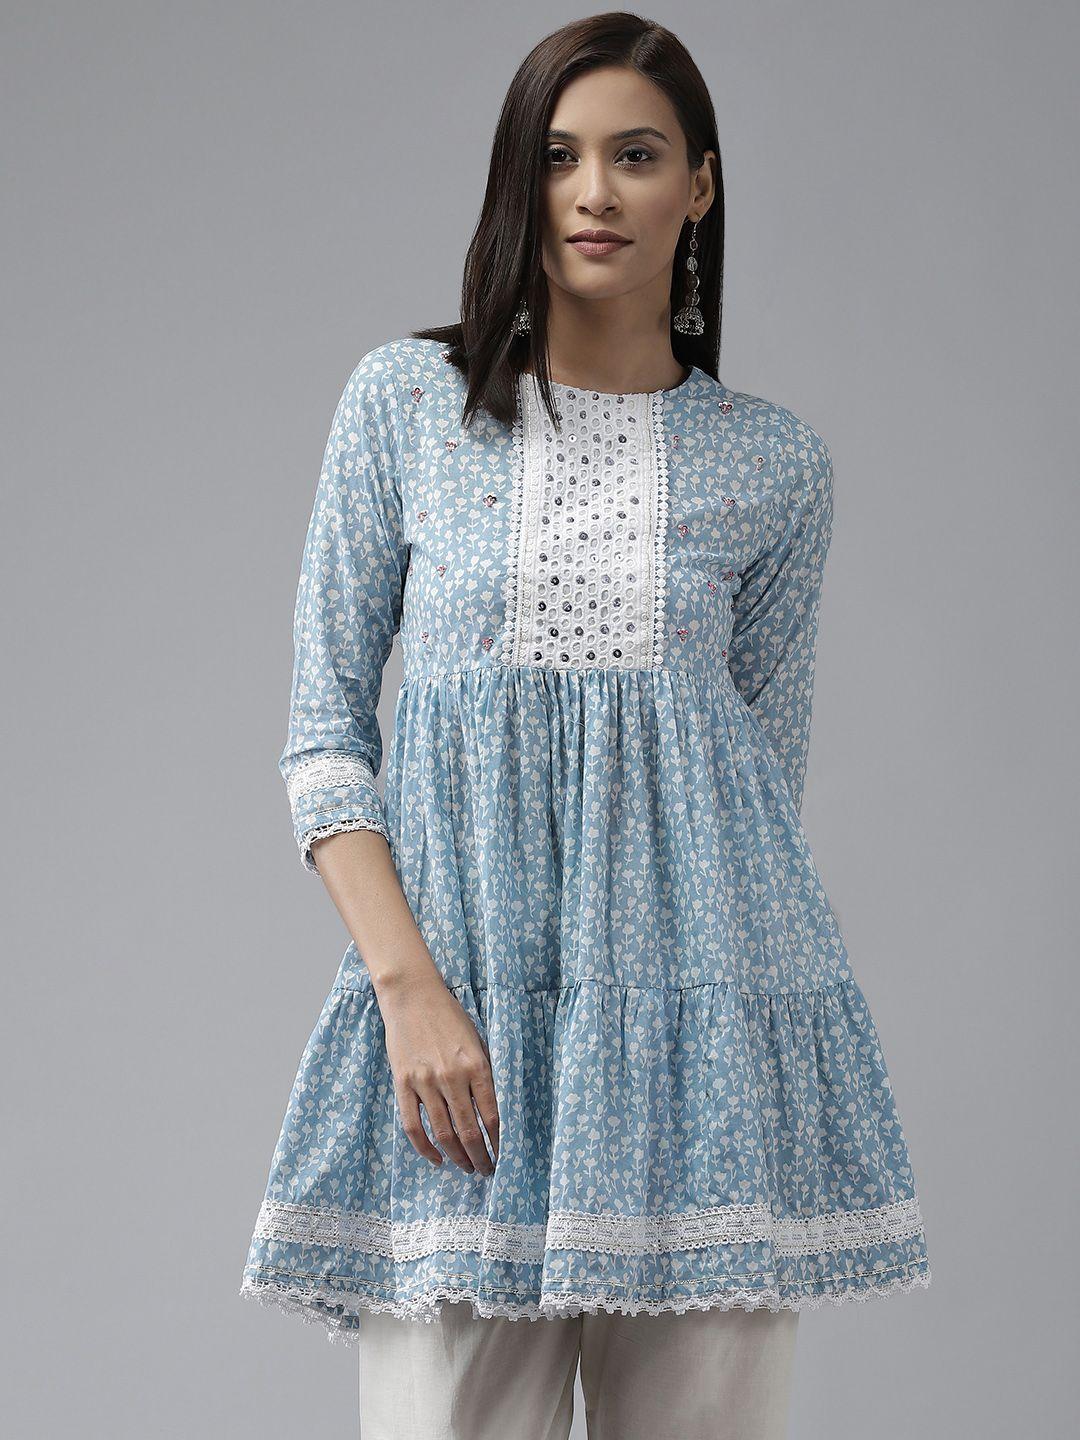 amirah-s-blue-&-white-ethnic-motifs-printed-lace-inserts-pleated-pure-cotton-tunic